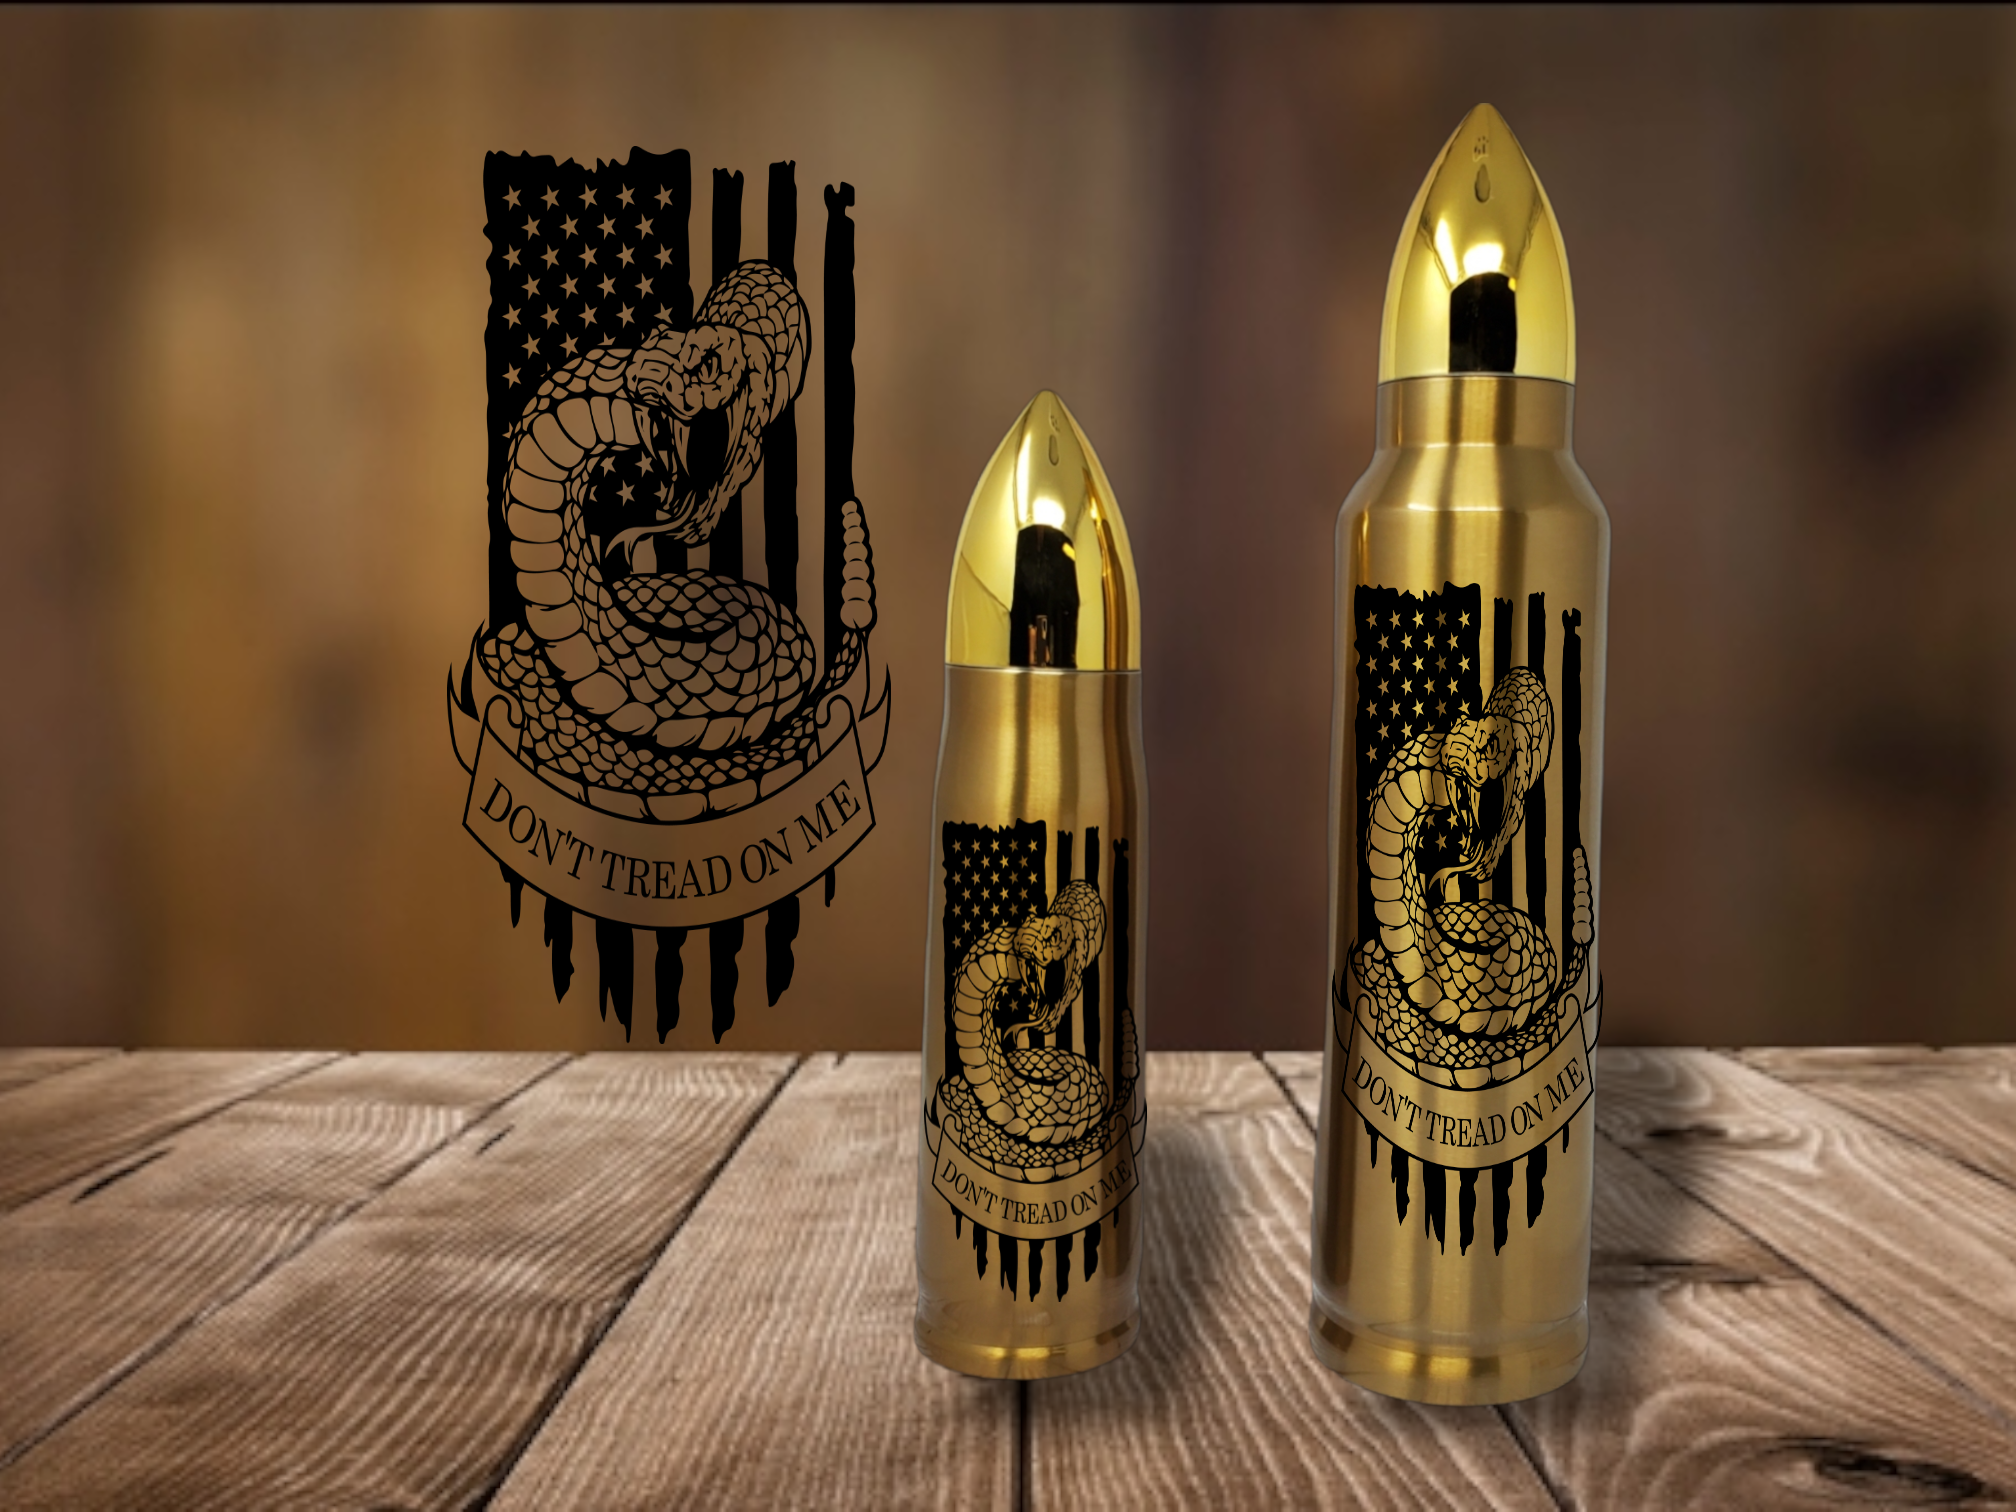 Don't Tread on Me Powder Coated Bullet Thermos